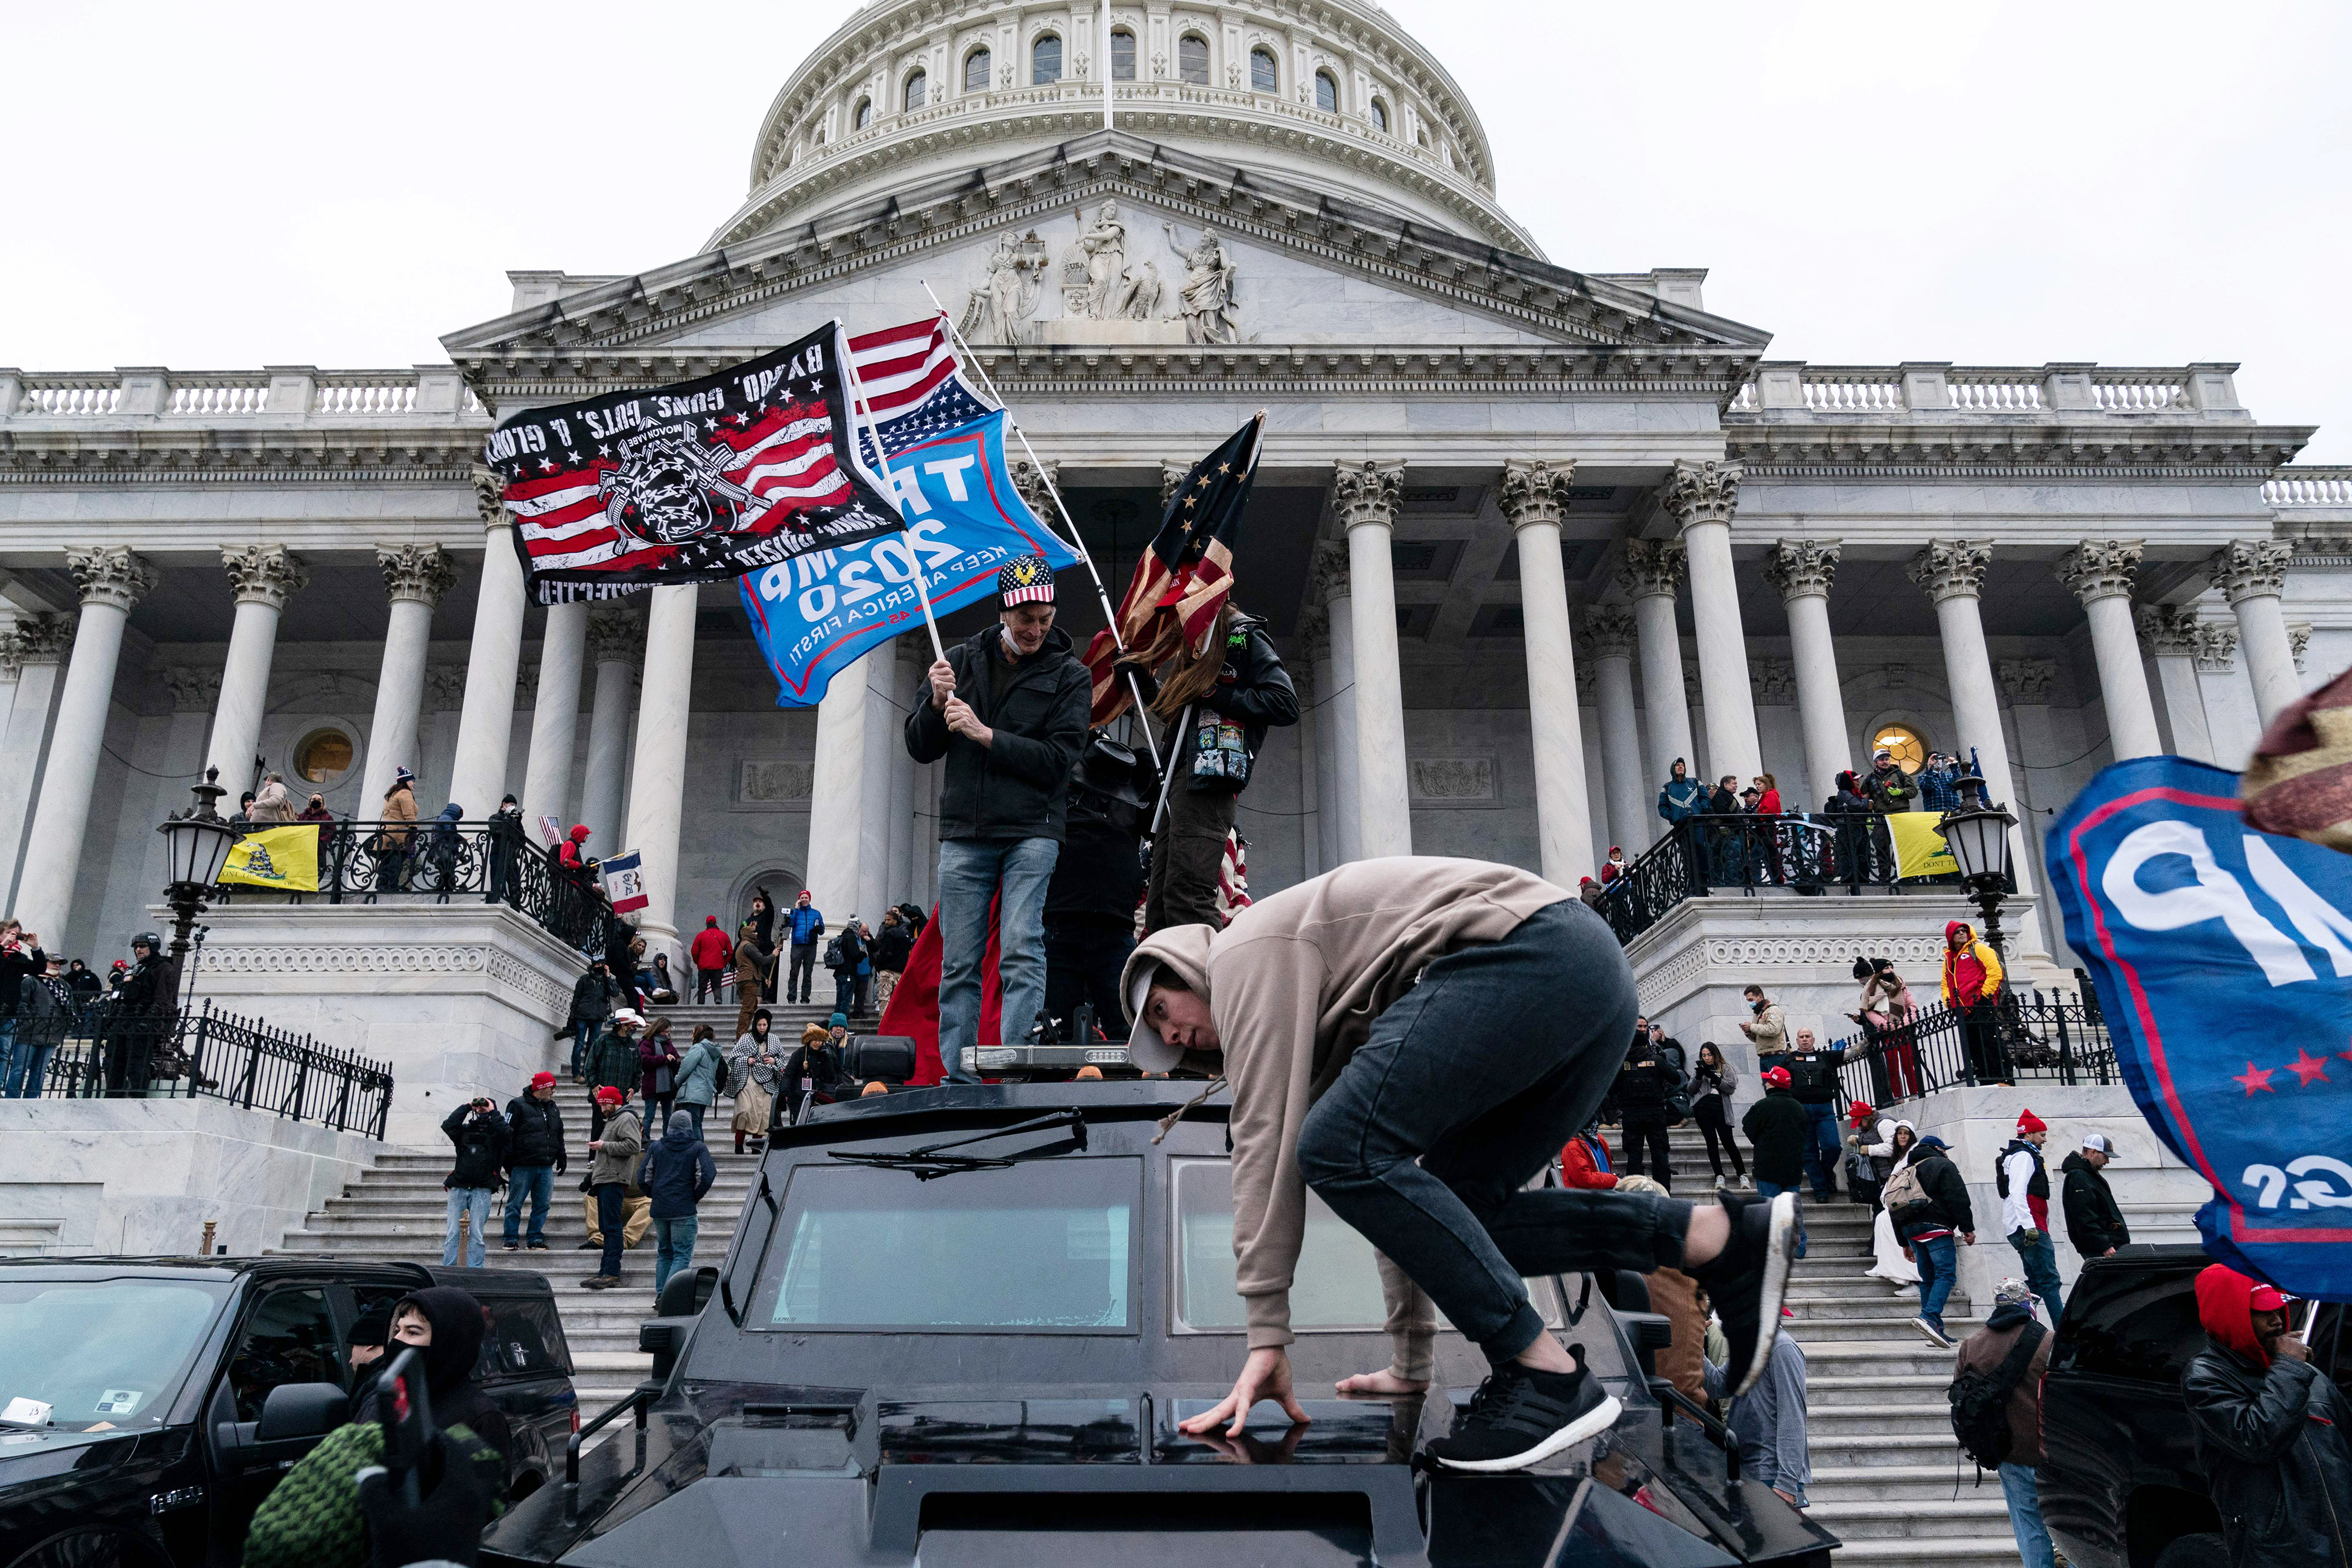 People waving flags while climbing on top of steps, military vehicles, and railings outside the Capitol building.